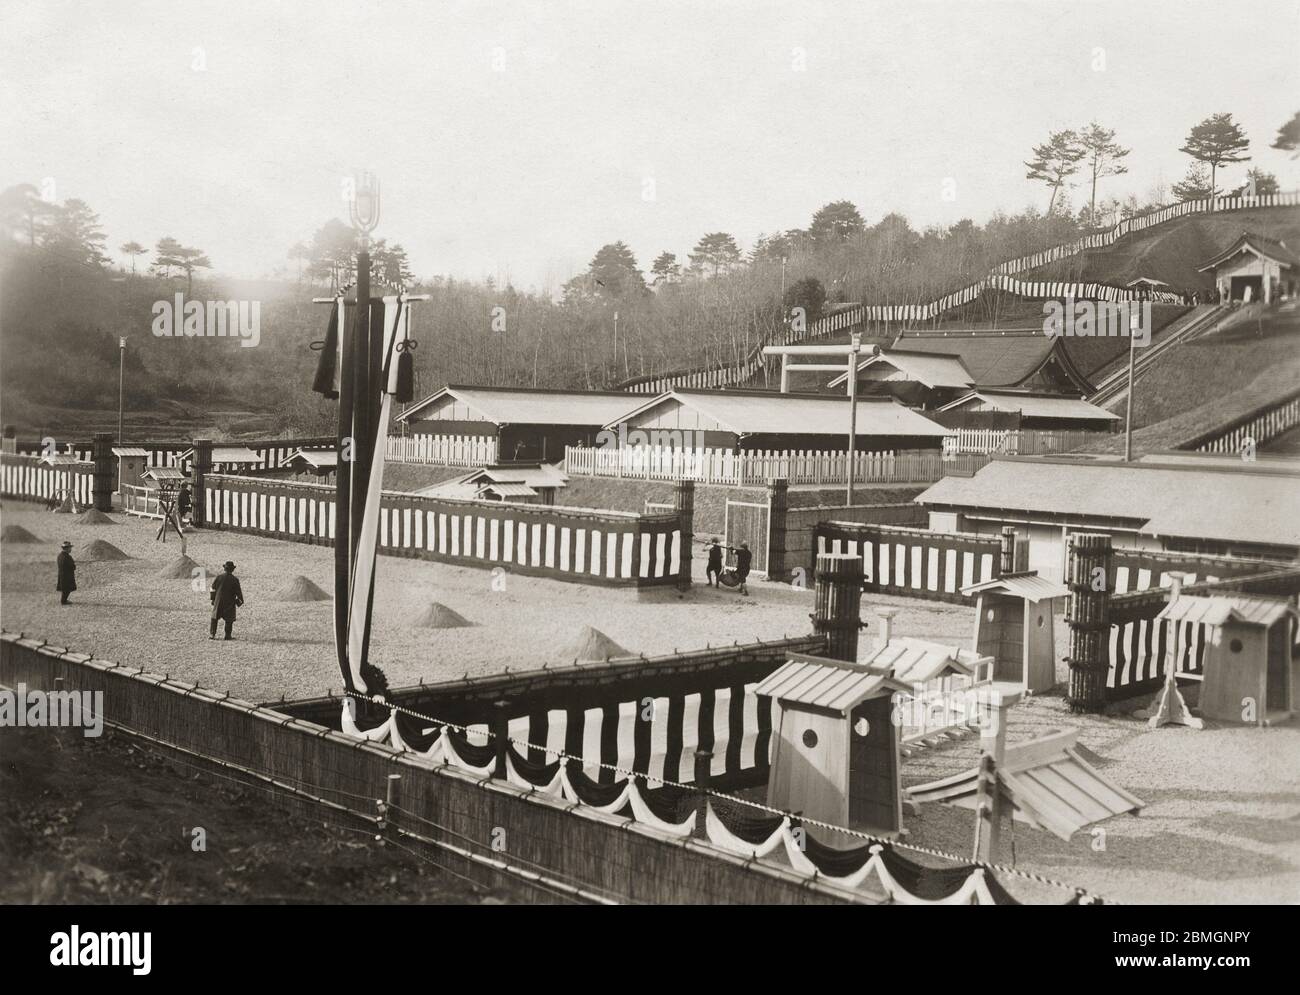 [ 1920s Japan - Tomb of Taisho Emperor ] —   The tomb of Emperor Taisho (1879–1926) ready for his burial, which took place on February 8, 1927 (Showa 2).  It is located at Musashi Imperial Mausoleum (武蔵陵墓地, Musashi Ryobochi), a complex in Hachioji (八王子市), Tokyo.  20th century vintage gelatin silver print. Stock Photo